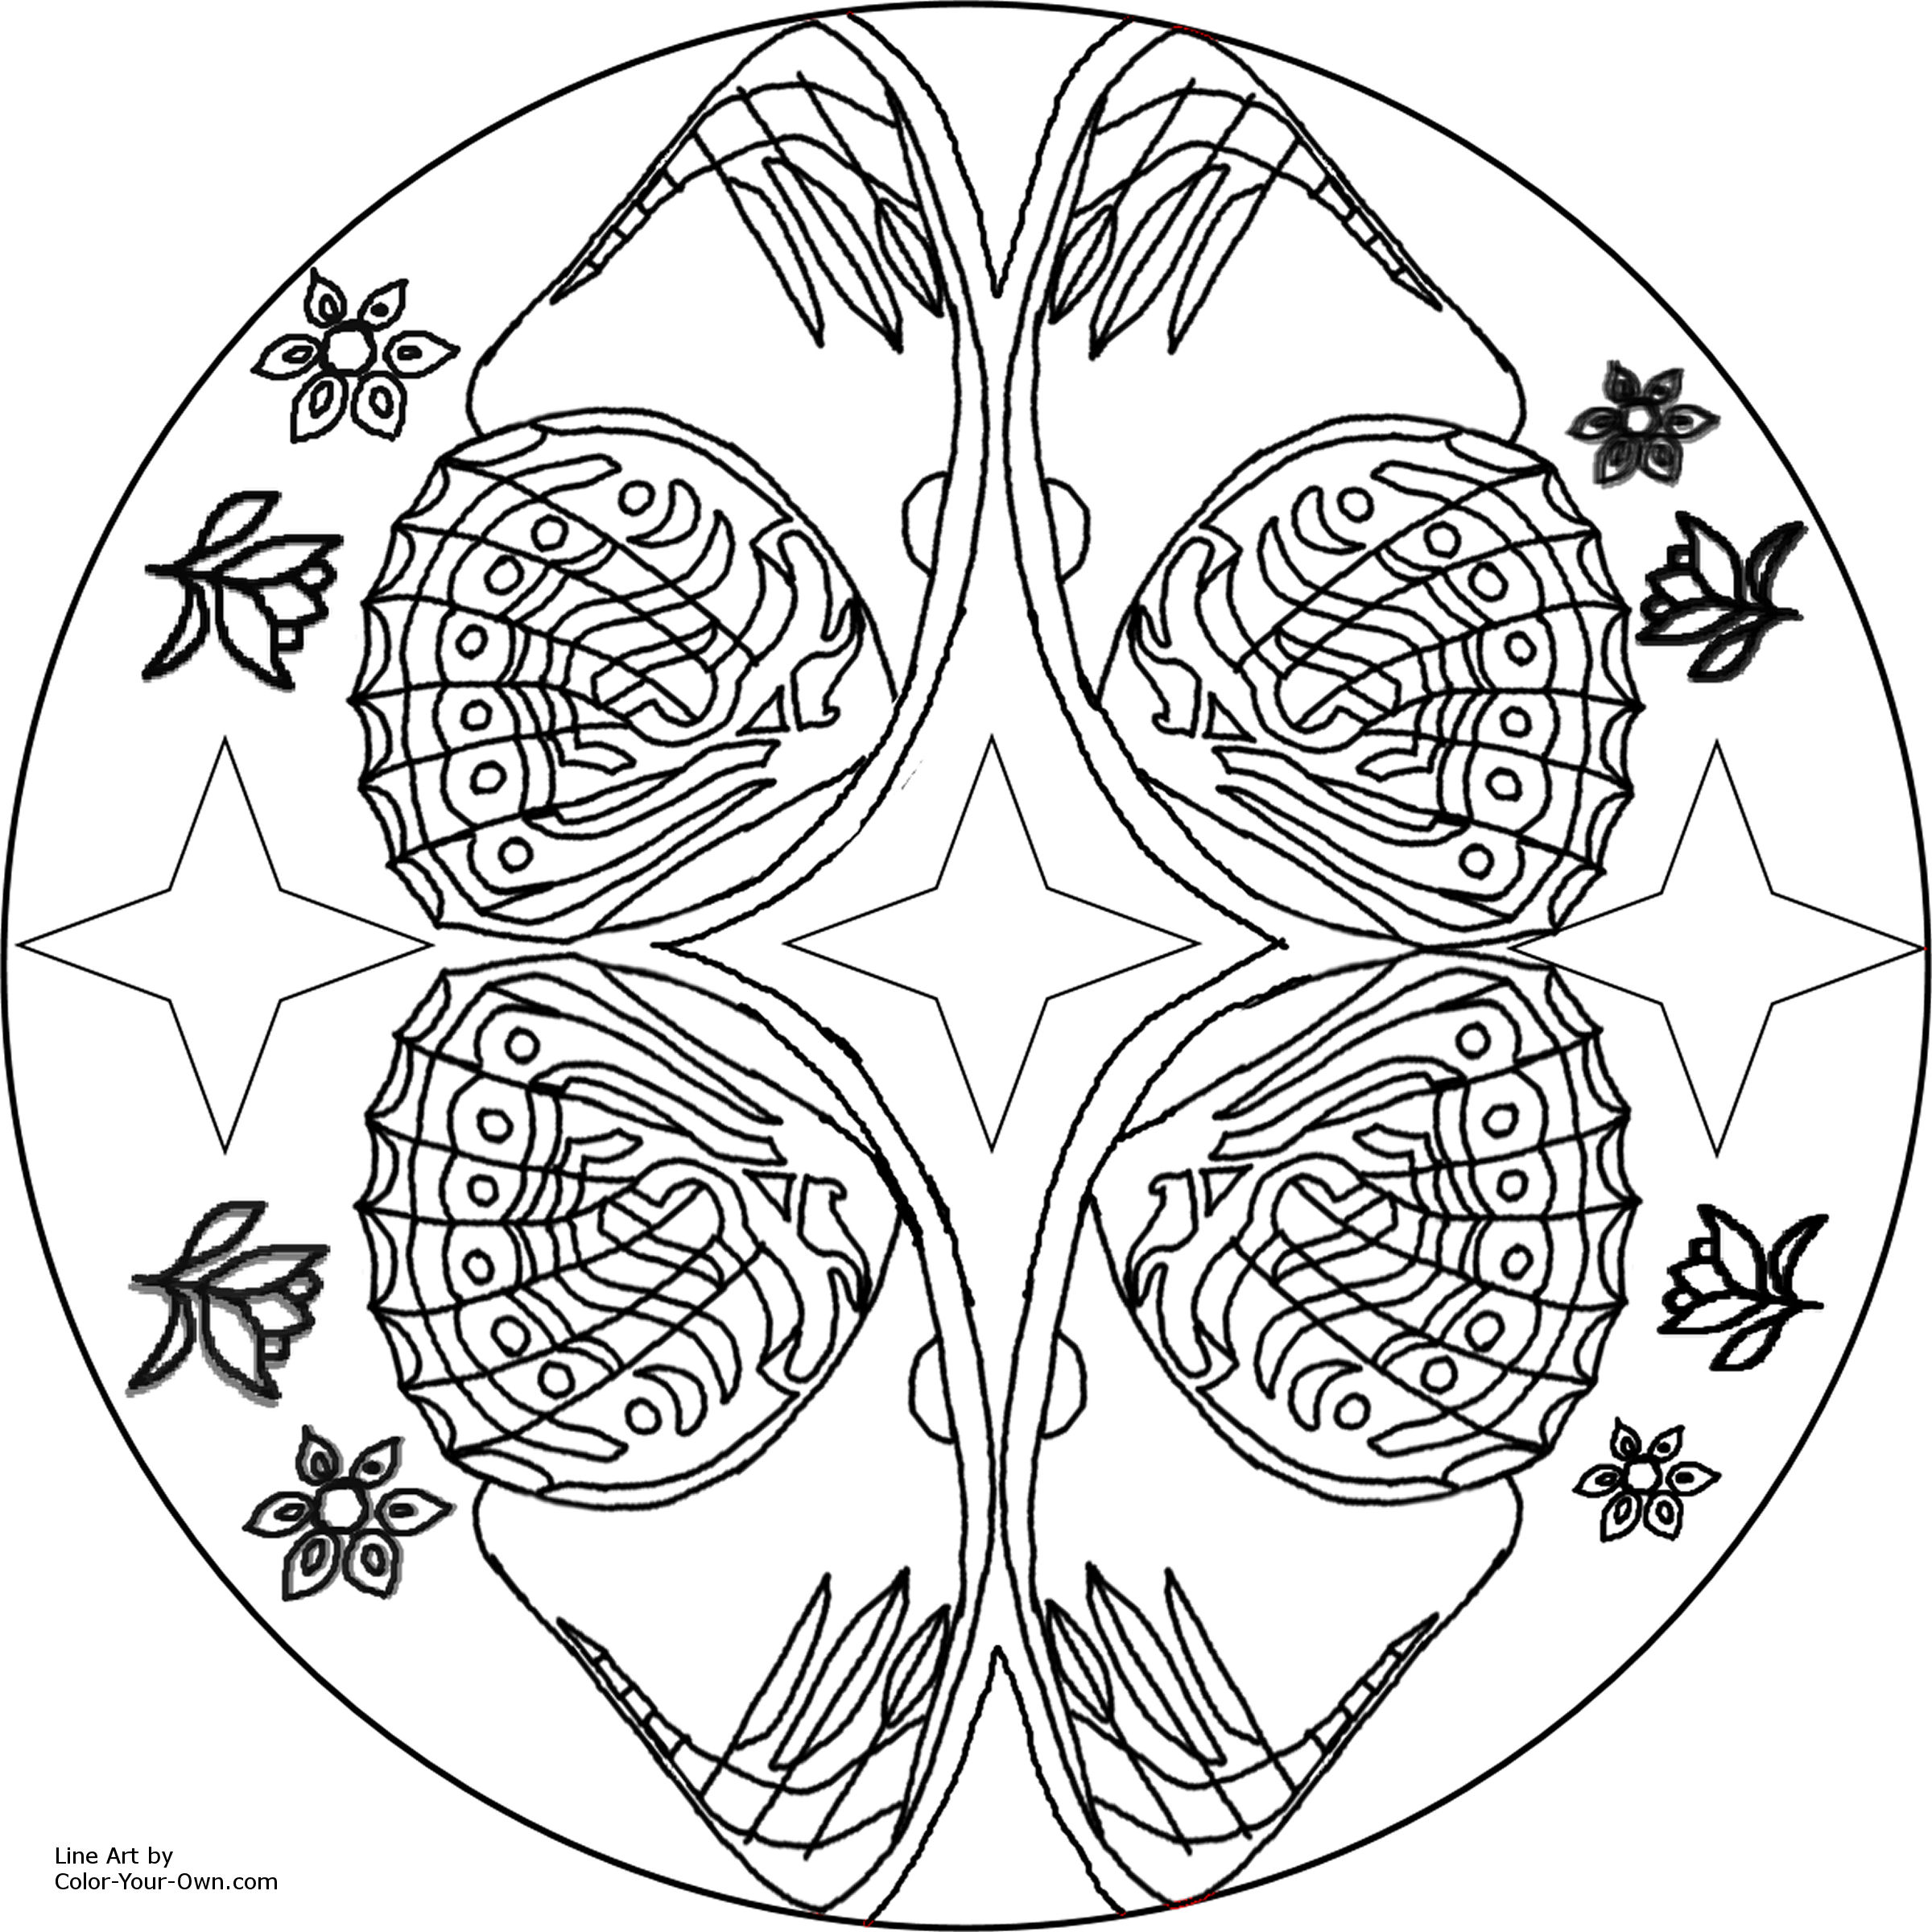  Mandala Coloring pages | FREE coloring pages | #64